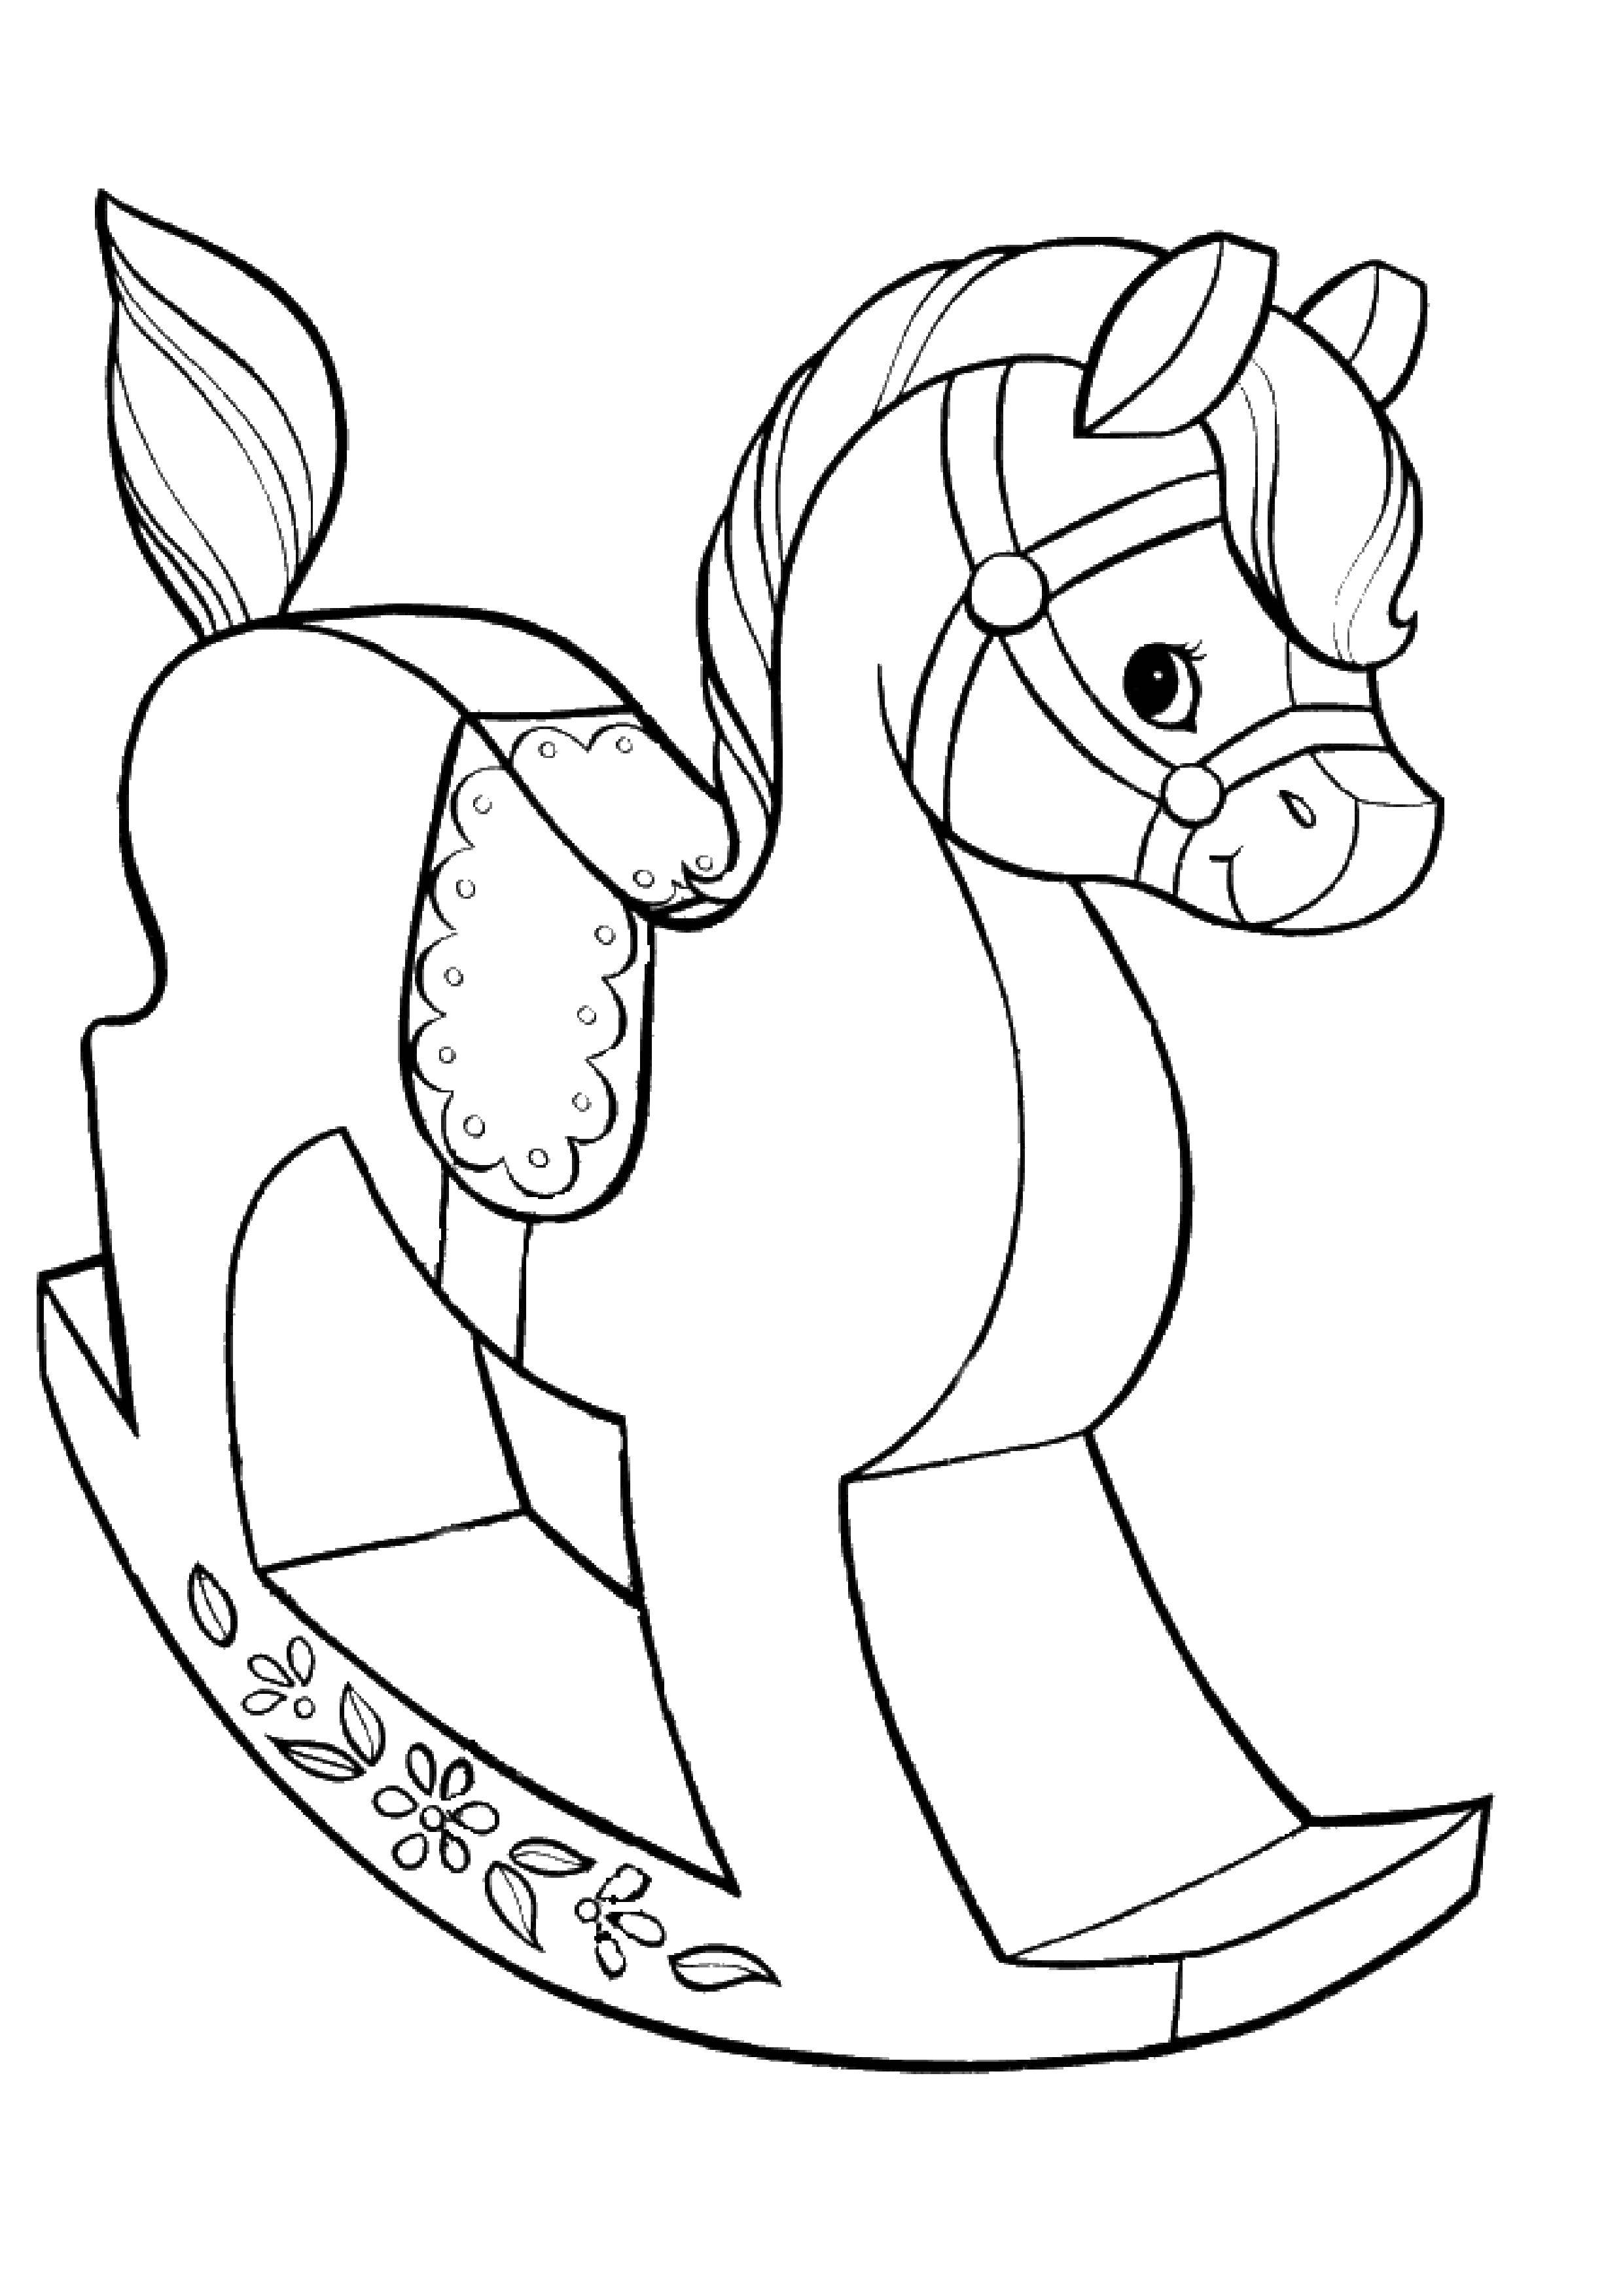 Coloring Horse rocking. Category toys. Tags:  Horse.